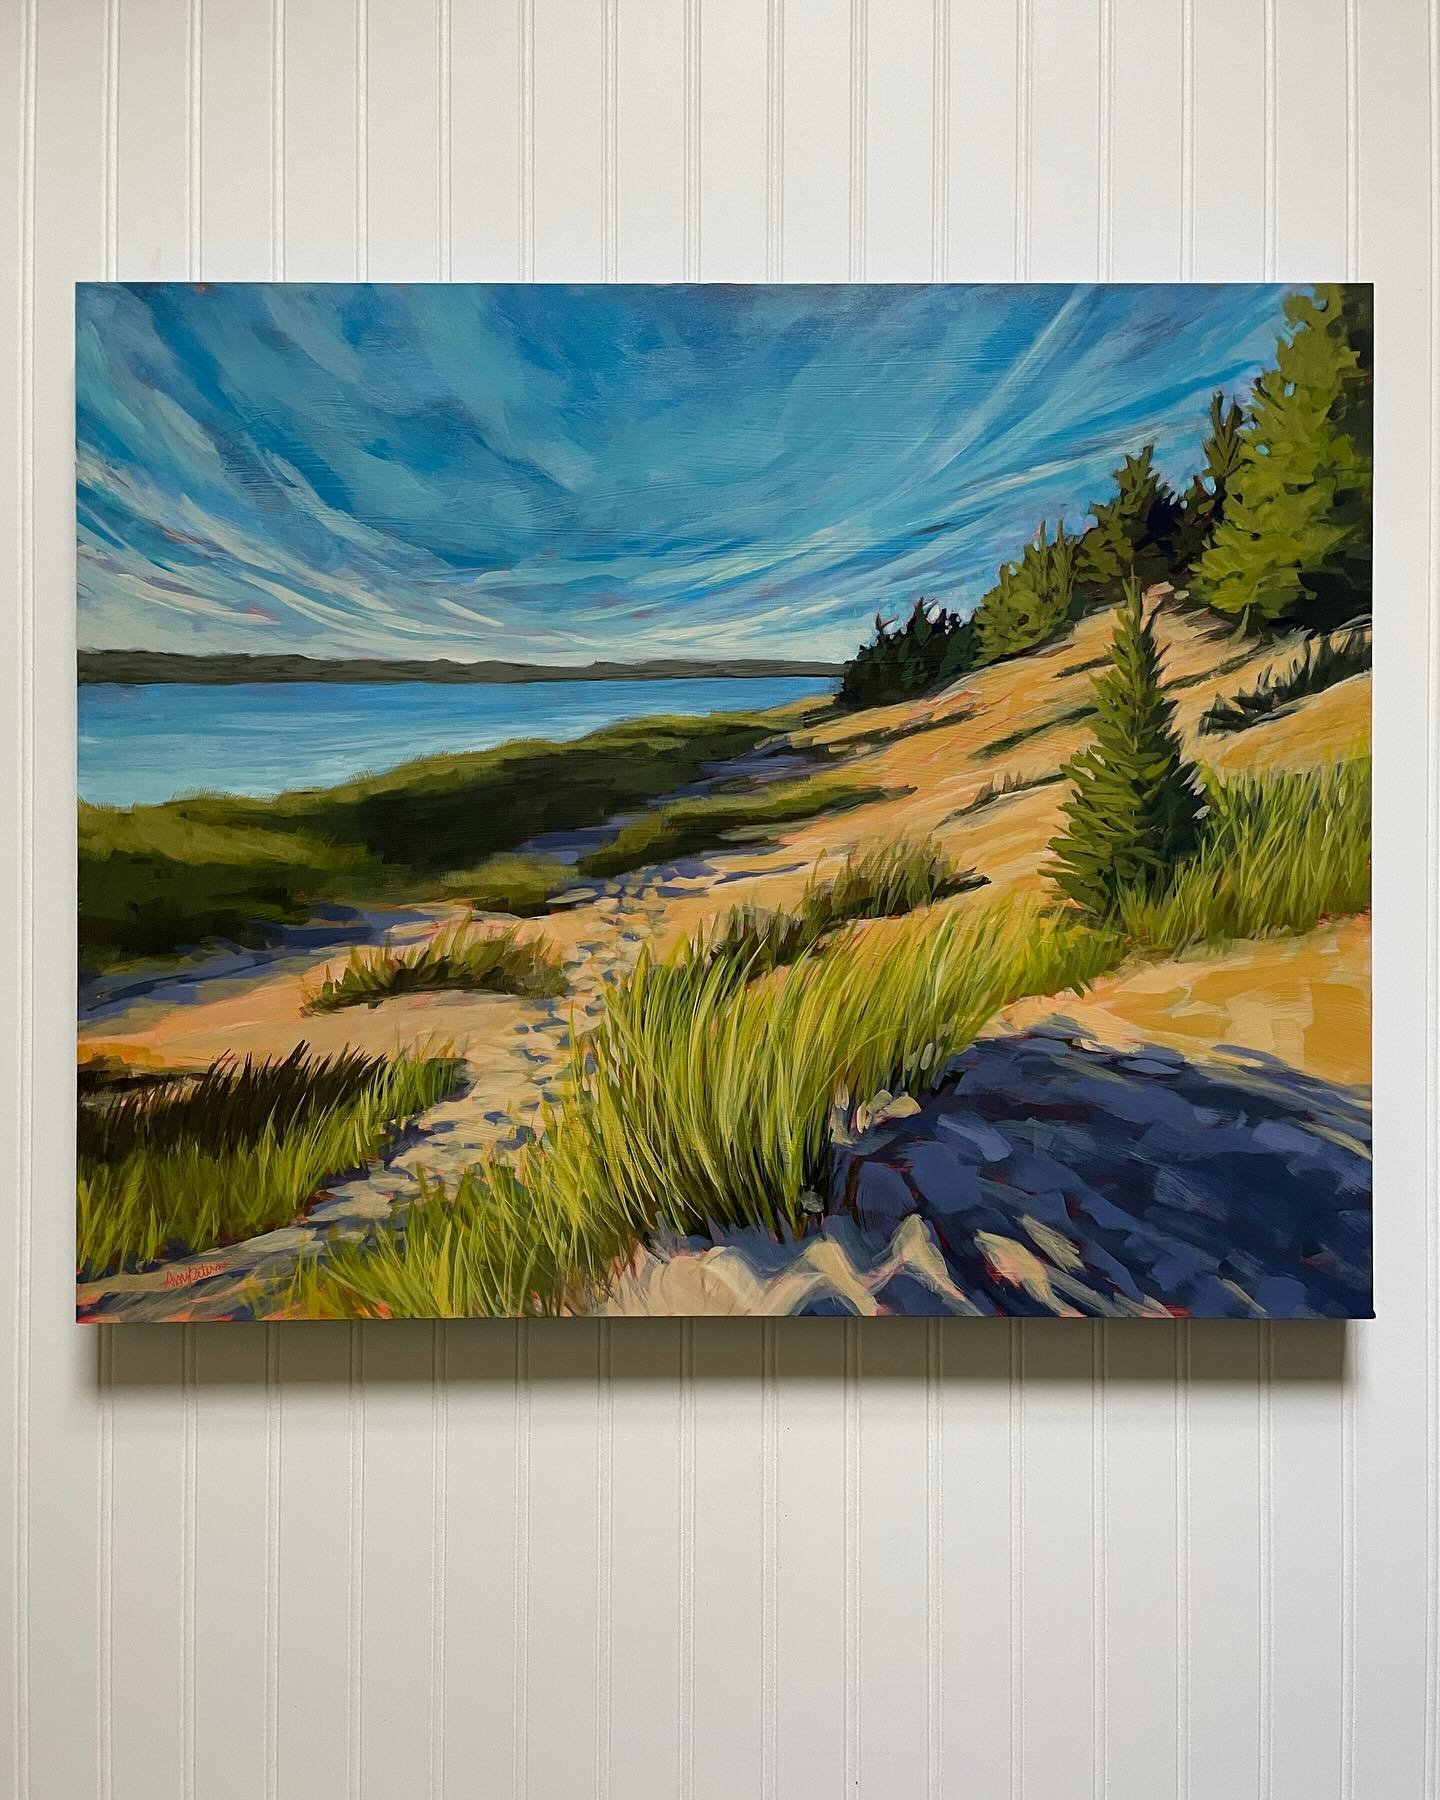 That Summer Feeling
24x30&rdquo;
On exhibit now through May 31 @charlevoixlibrary and available for purchase at amypetermanart.com

#summerpainting #thatsummerfeeling #summeroncanvas #beachpainting #northernmichiganart #michiganart #waterwonderland